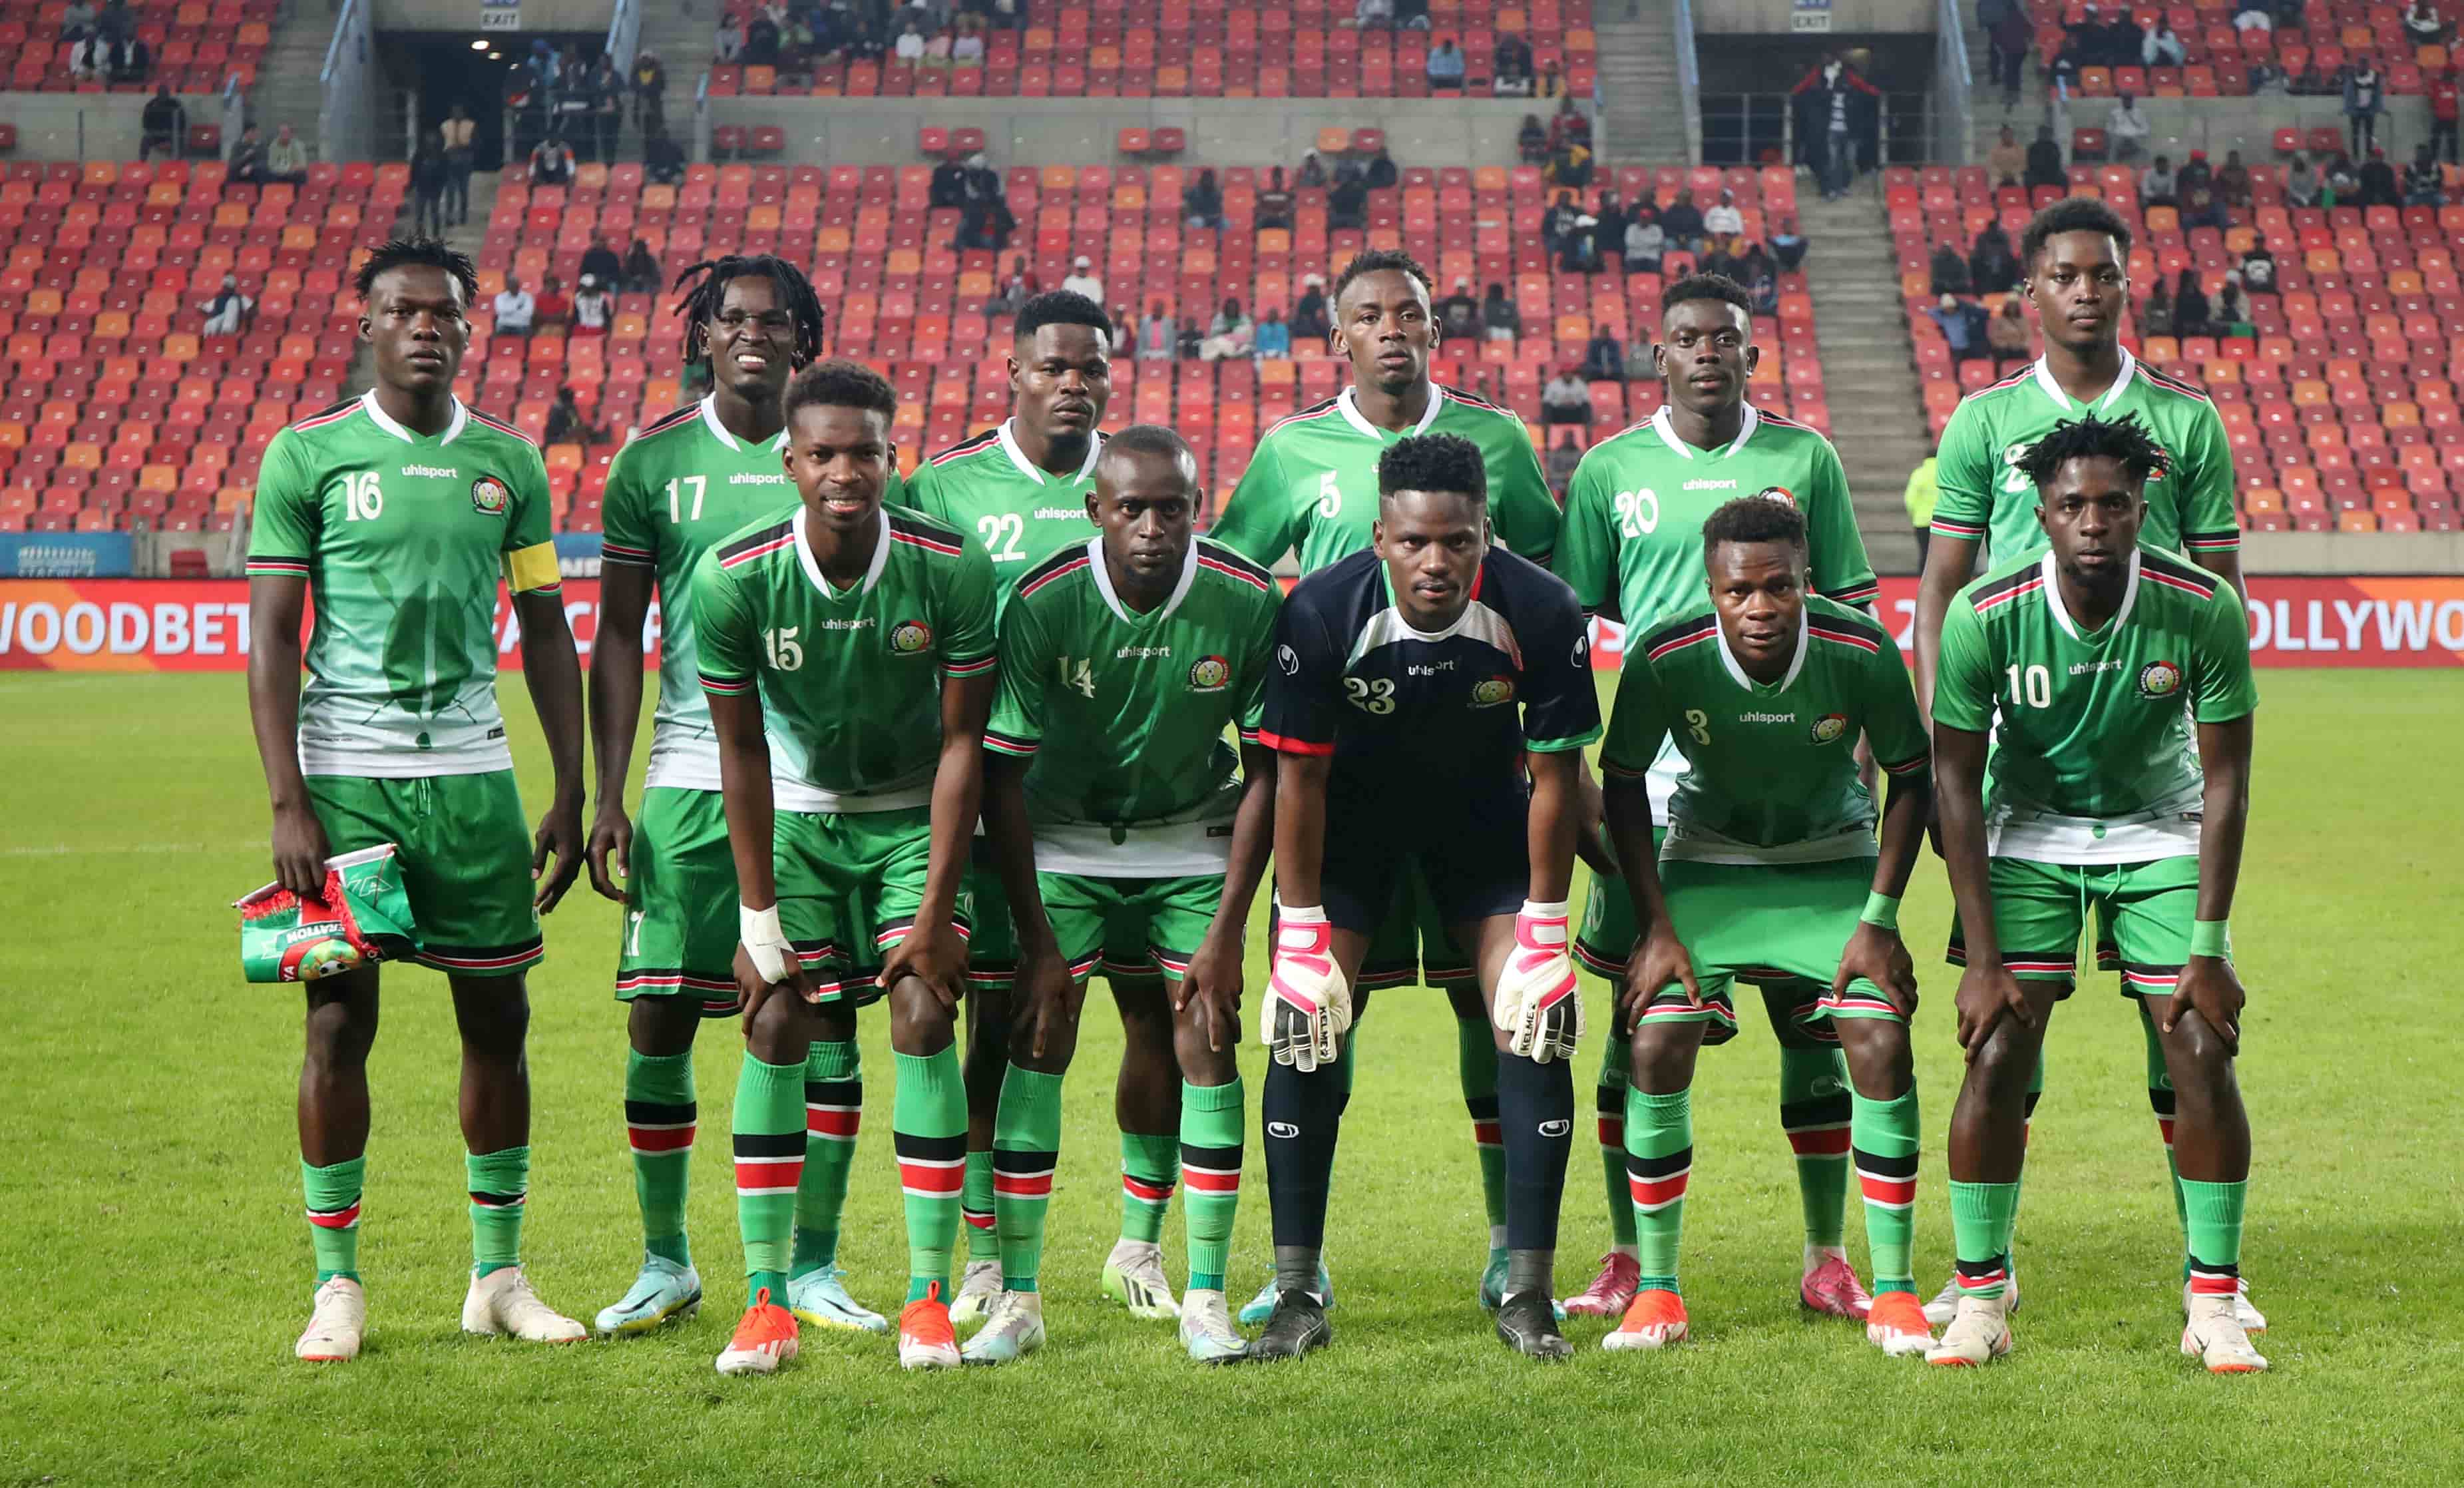 Why Kenya was eliminated from the COSAFA Cup despite finishing second in Group B